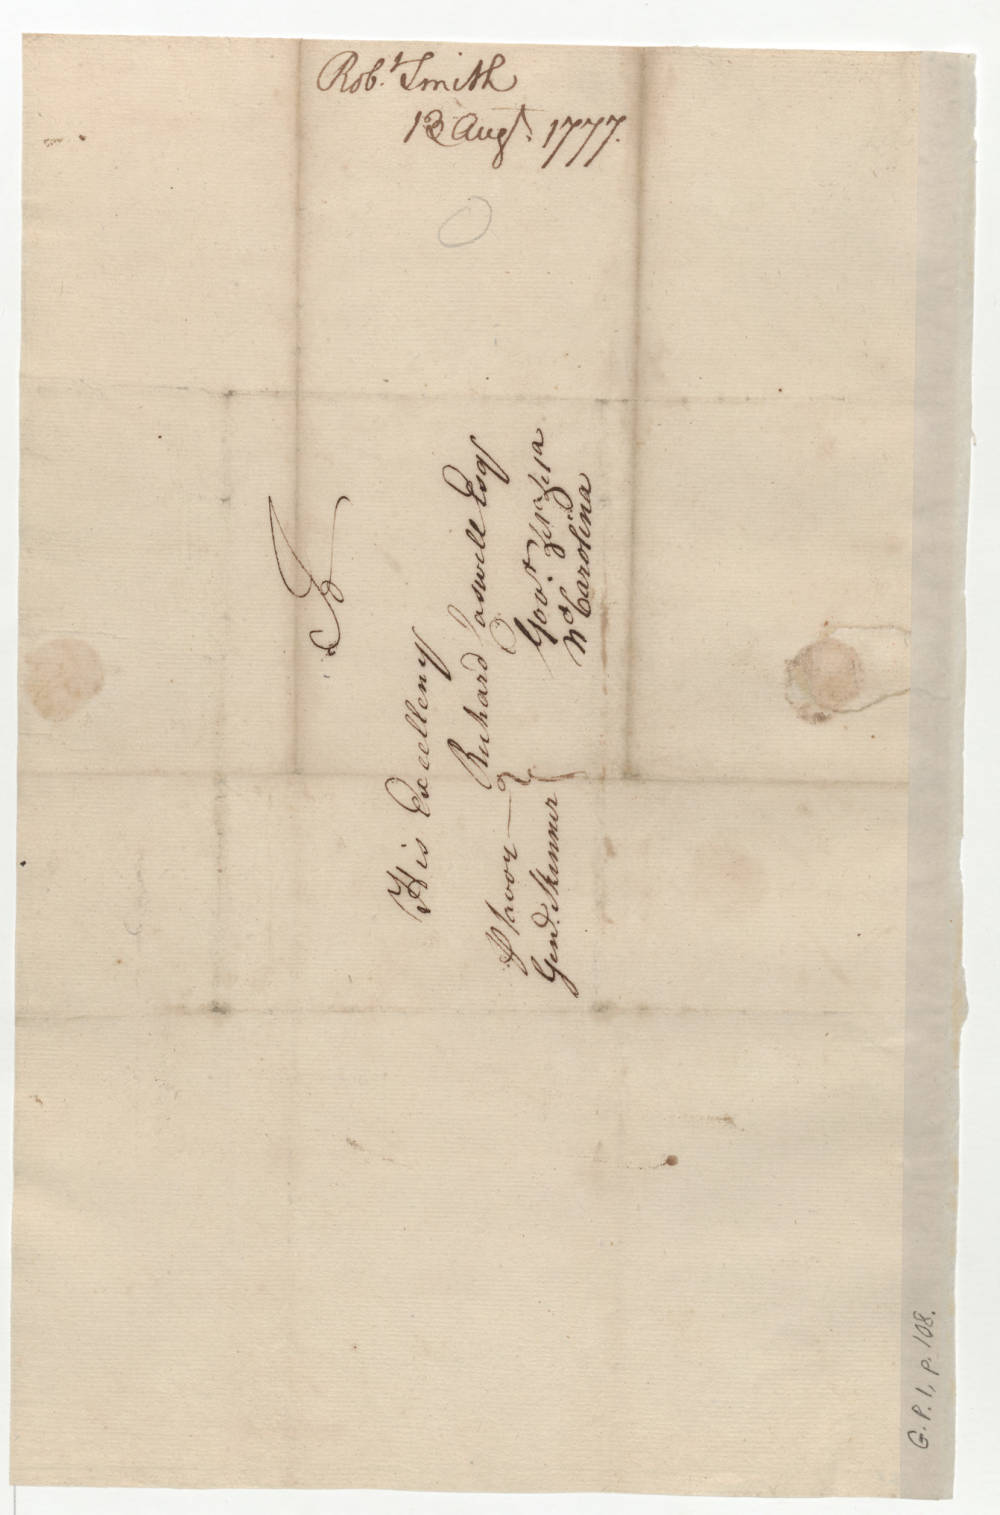 Letter from Robert Smith to Richard Caswell, 13 August 1777, page 2